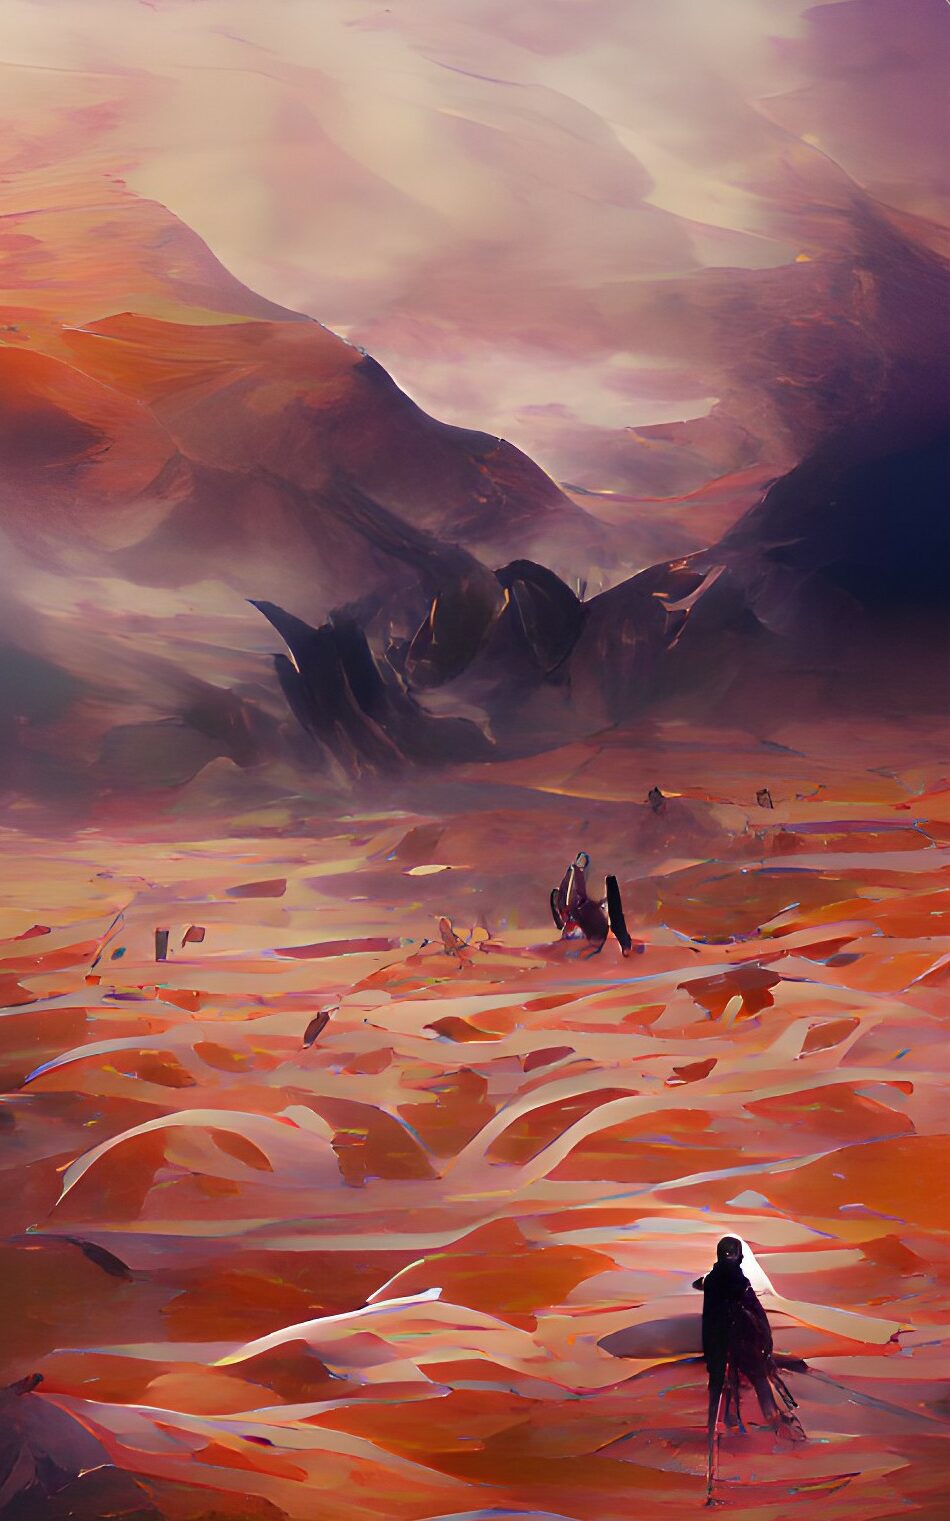 An imaginary image of a bare and desolate earth meant to depict all resources being depleted